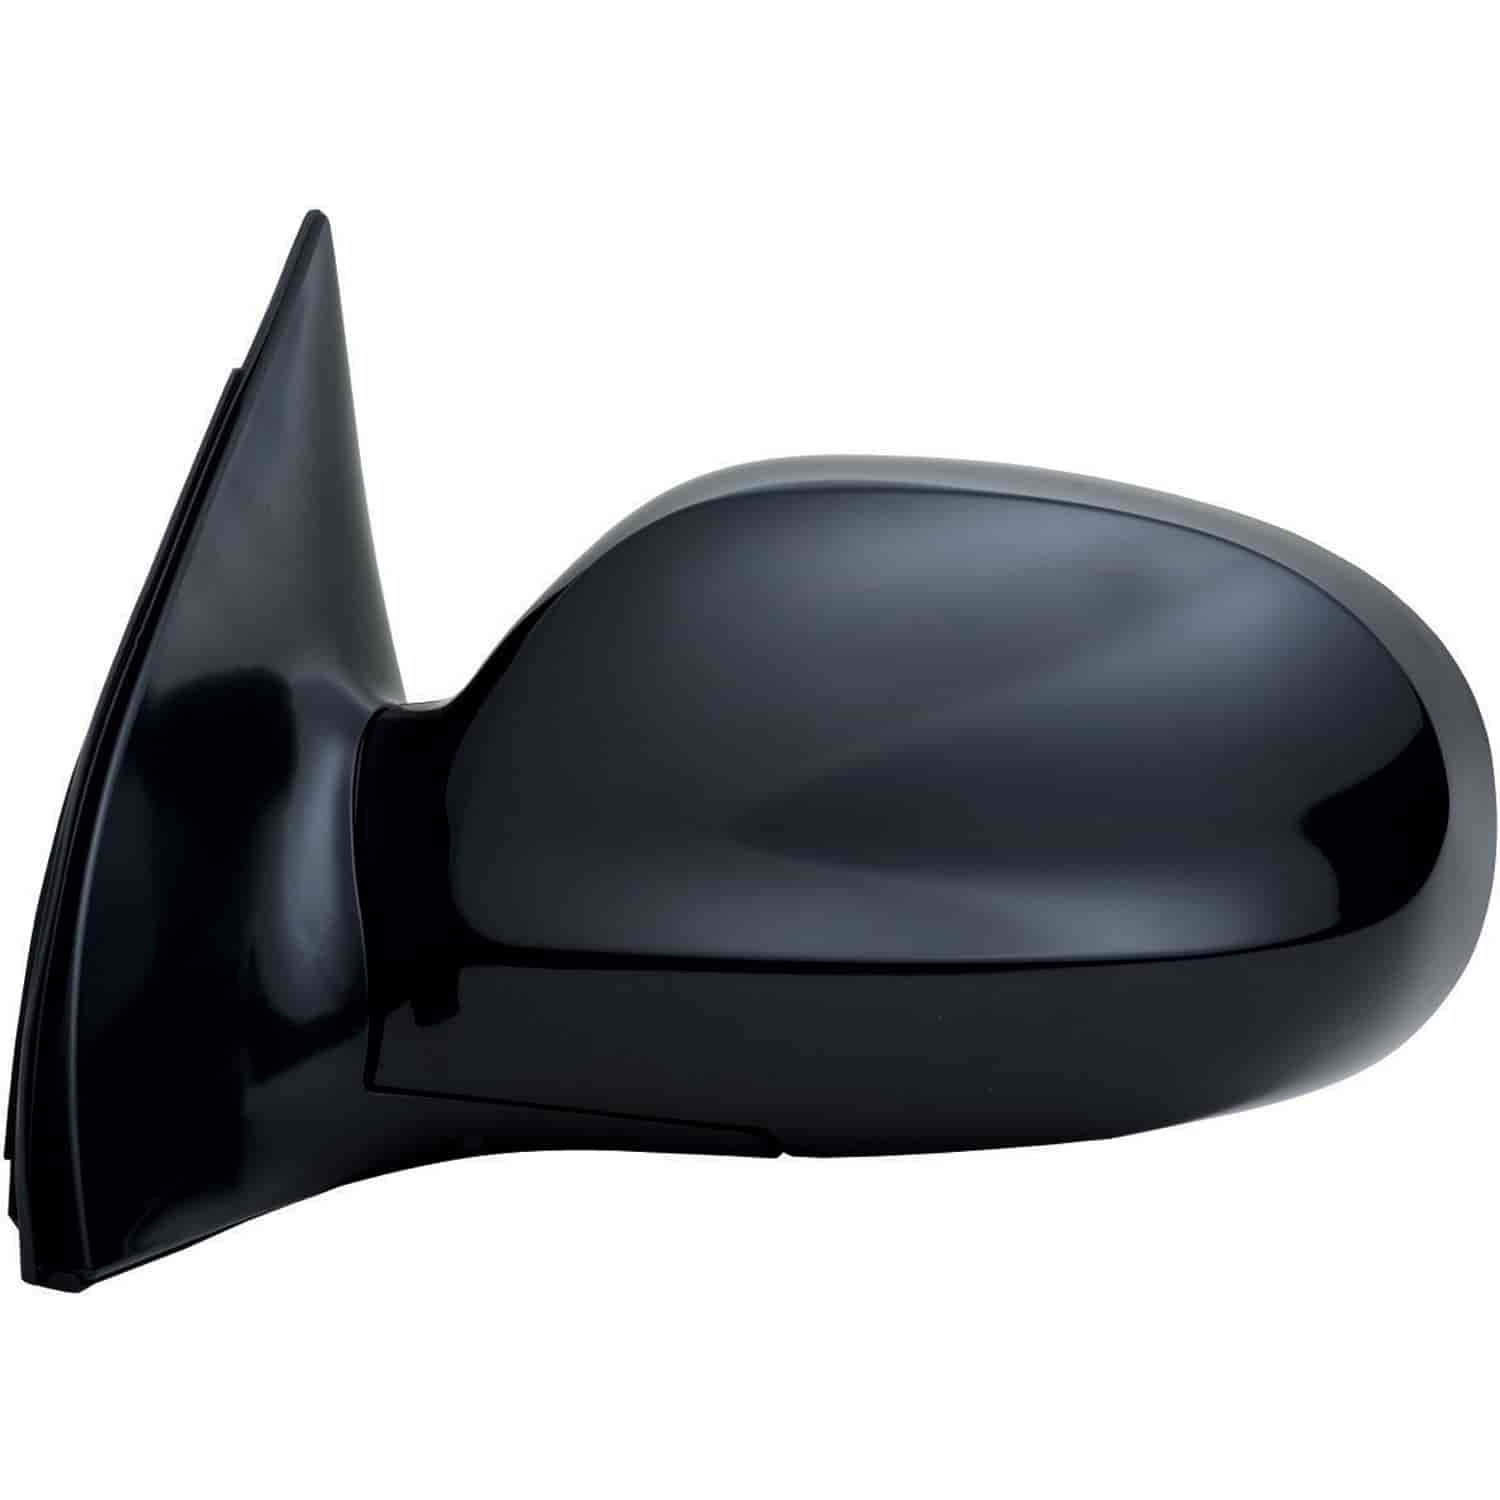 OEM Style Replacement mirror for 02-05 Kia Sedona LX model driver side mirror tested to fit and func